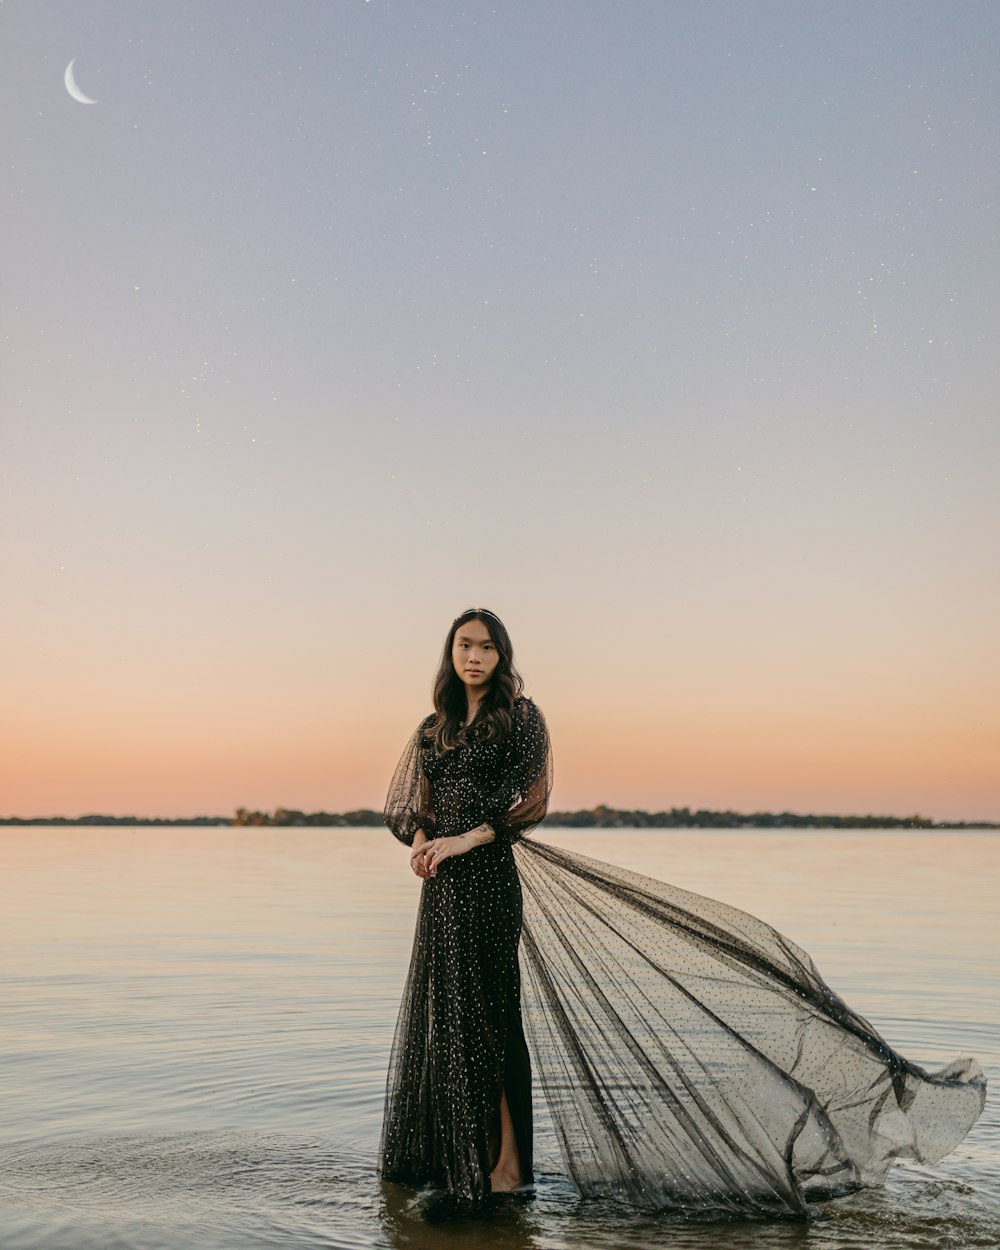 a person in a dress standing in water with a net in the hand